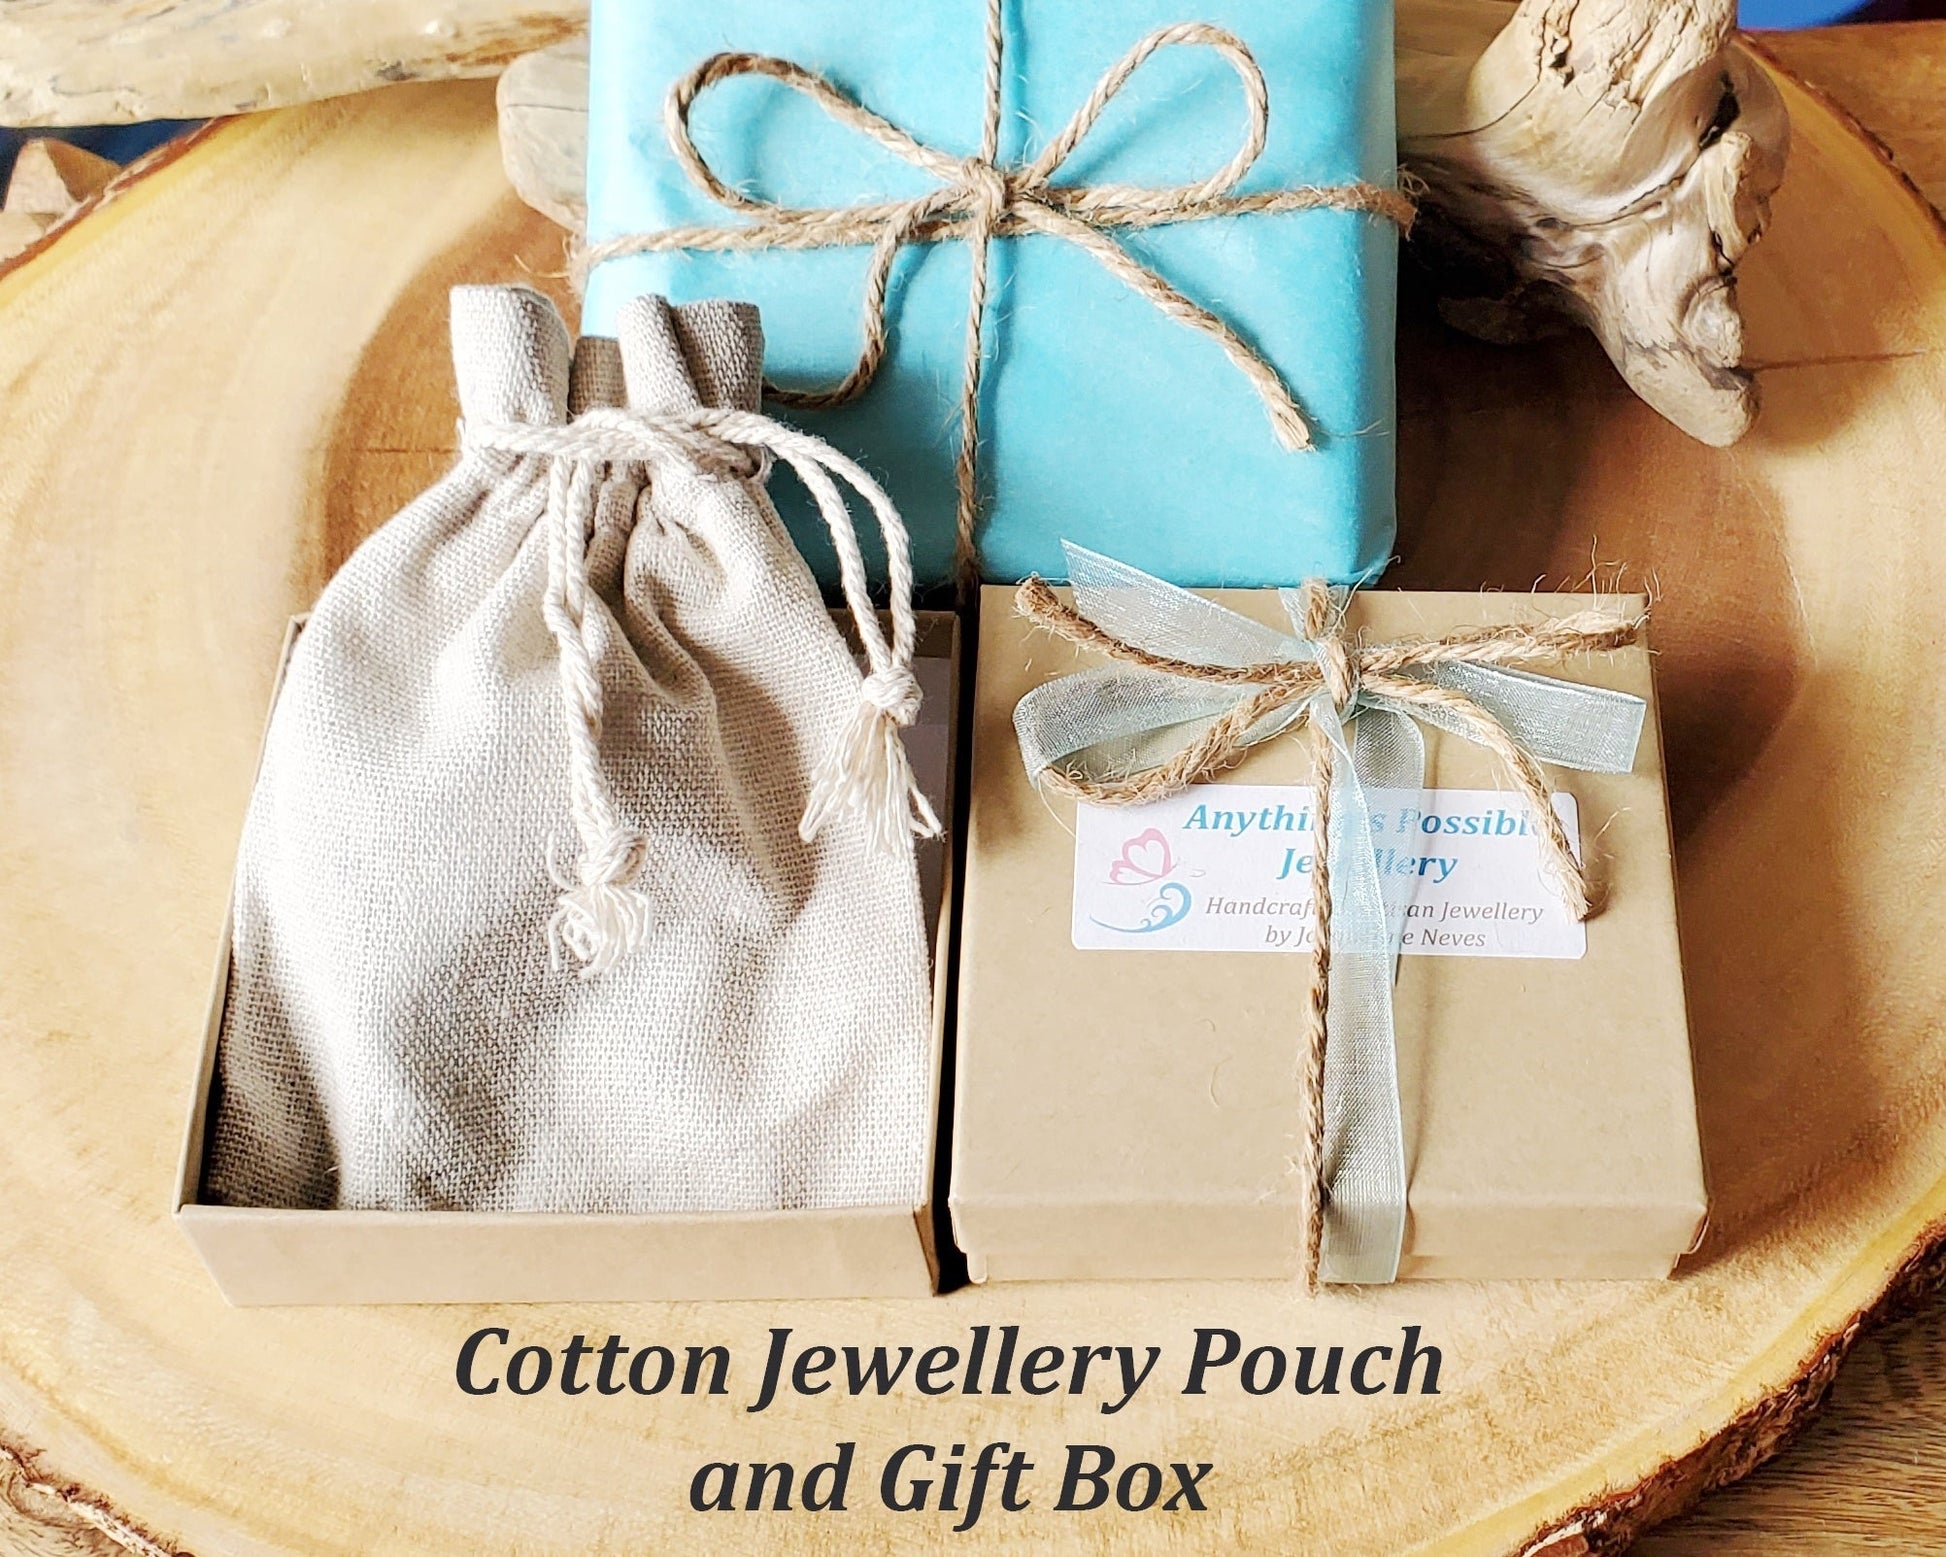 Eco Friendlier Recycled Paper Gift Box, Reusable Cotton Jewellery Pouch, Tissue Paper, Ribbon, and Twine